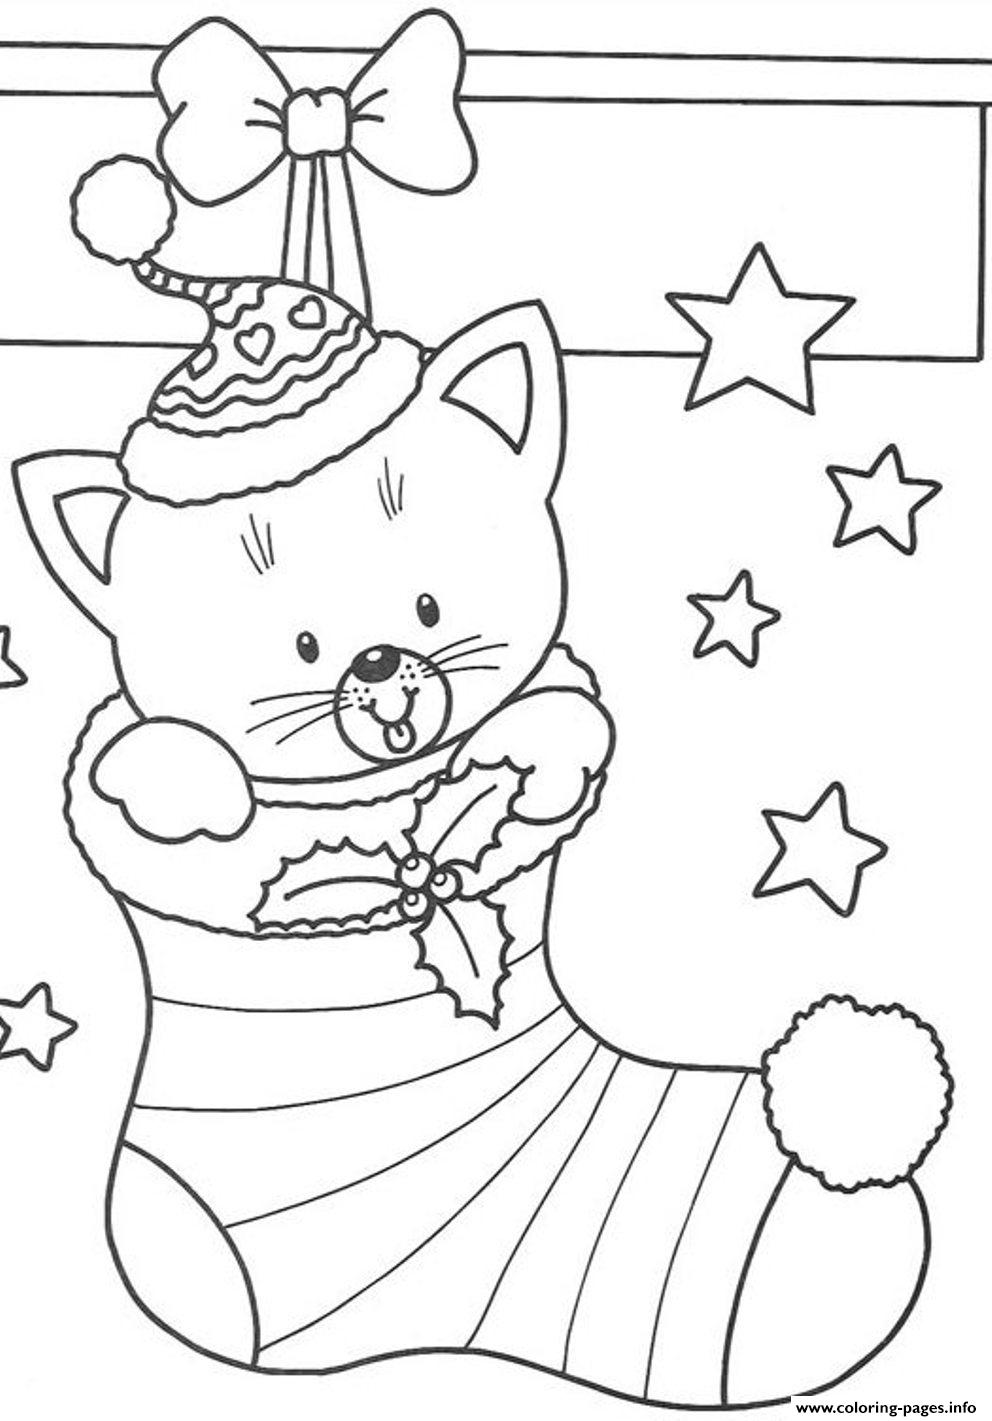 Free S Christmas Cat In Stocking8a58 Coloring Pages Printable